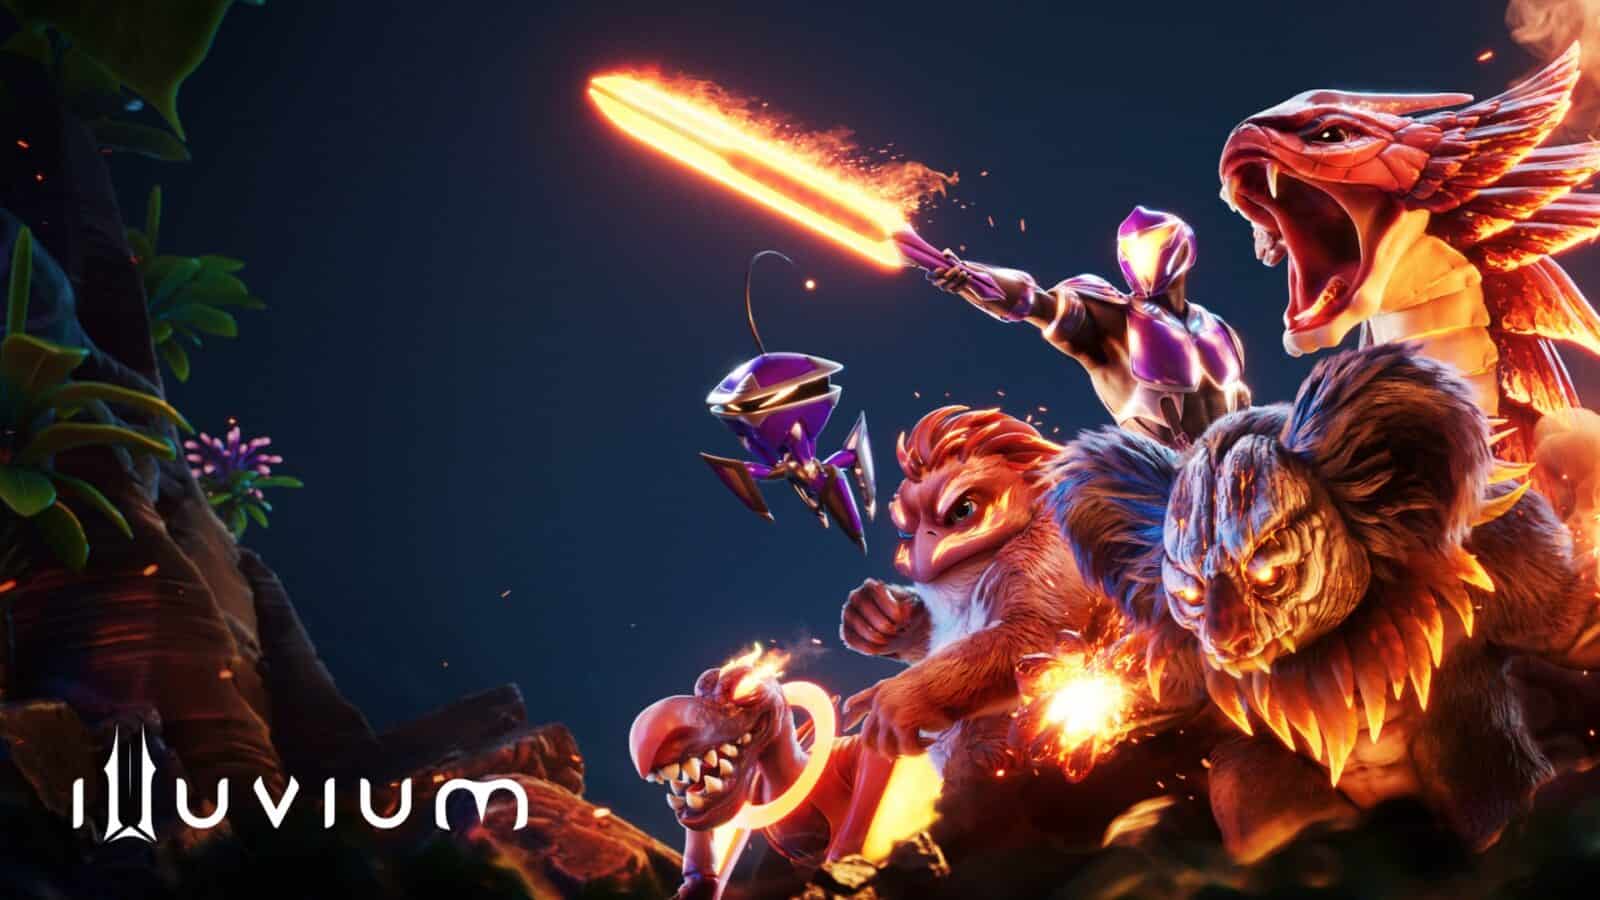 Illuvium Launches Early Access on Epic Games Store